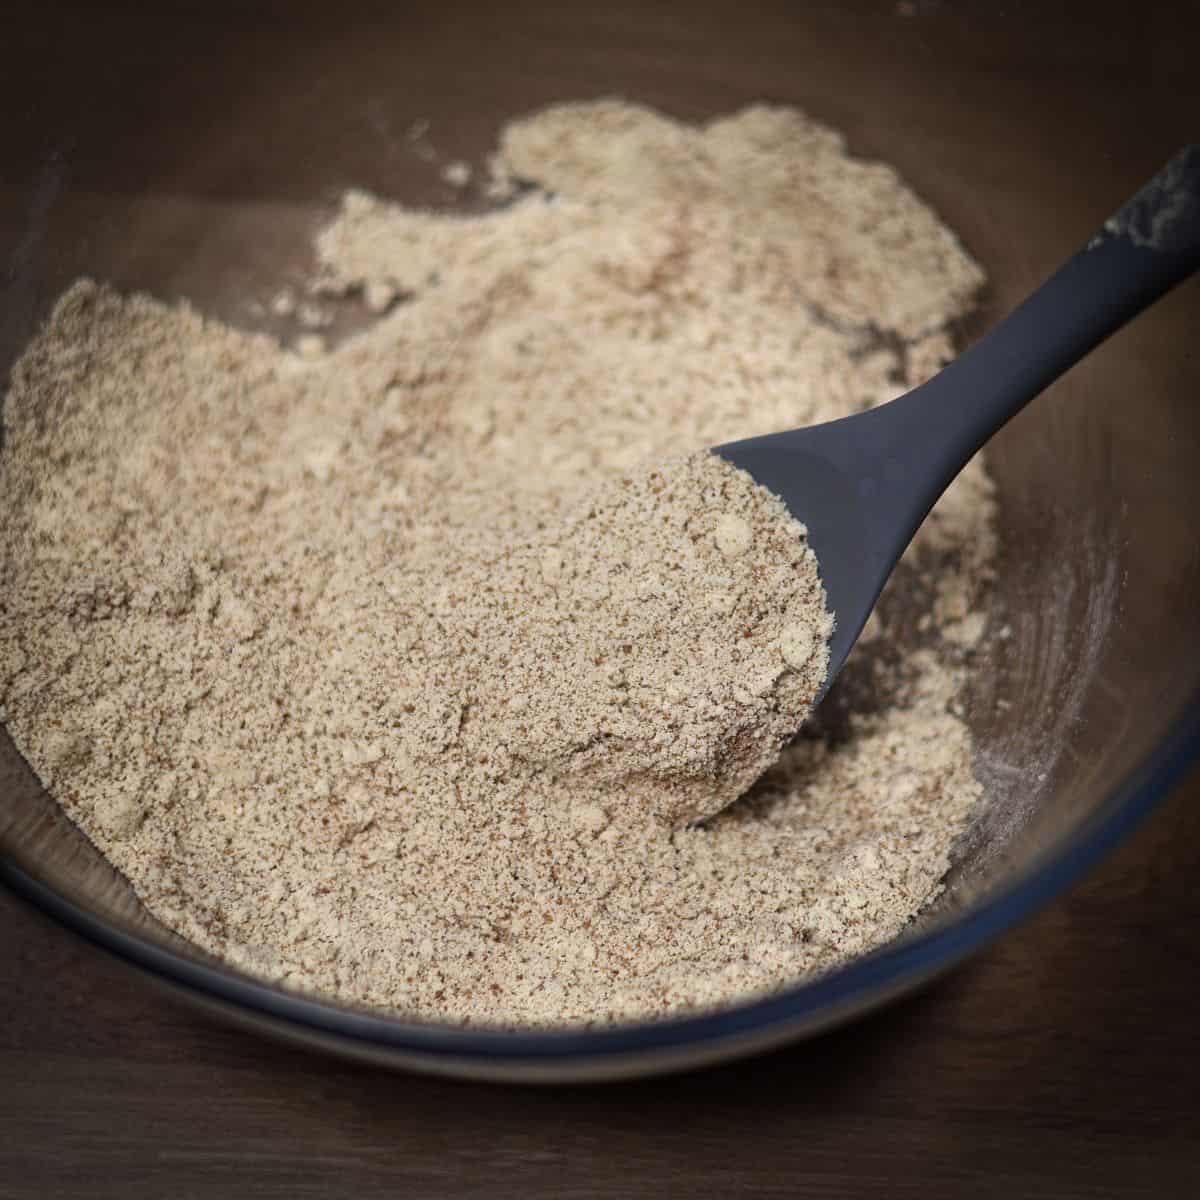 A bowl of dry ingredients for protein snickerdoodle cookies with a black silicone spatula. The mix appears finely ground and sandy in texture.